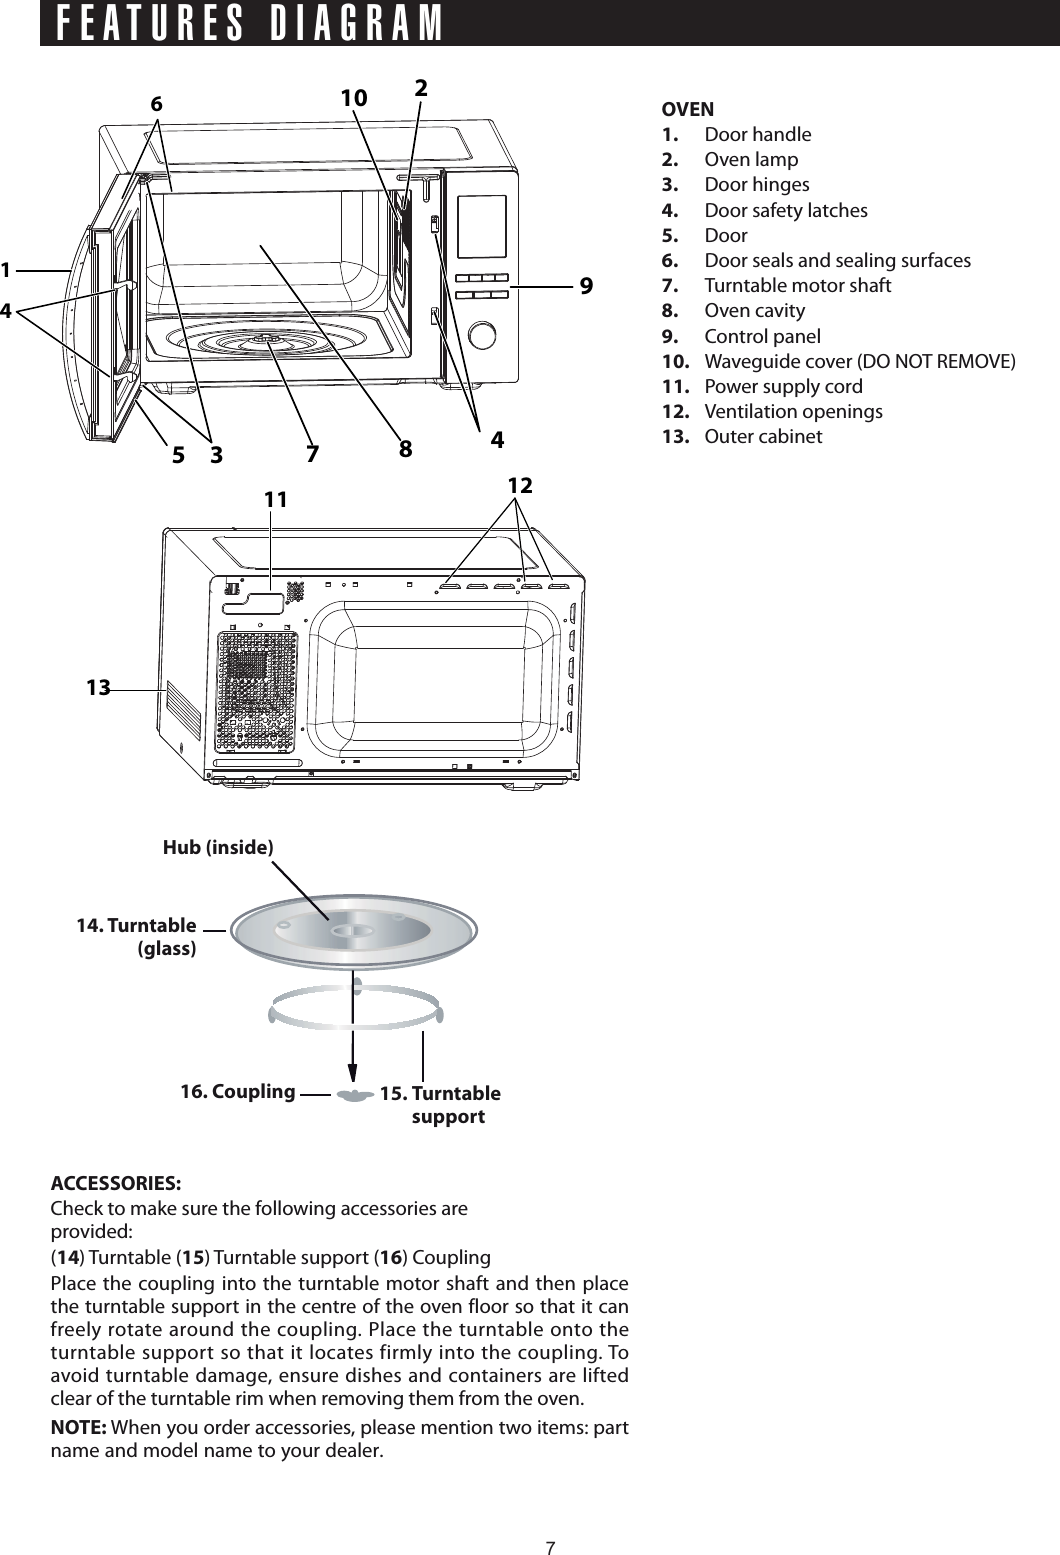 FEATURES DIAGRAMOVEN1.   Door handle2. Oven lamp 3. Door hinges4.   Door safety latches5.   Door  6.  Door seals and sealing surfaces7.  Turntable motor shaft8.   Oven cavity  9.   Control panel10.   Waveguide cover (DO NOT REMOVE)  11.  Power supply cord12. Ventilation openings13. Outer cabinetACCESSORIES:Check to make sure the following accessories areprovided:(14) Turntable (15) Turntable support (16) CouplingPlace the coupling into the turntable motor shaft and then place the turntable support in the centre of the oven floor so that it can freely rotate around the coupling. Place the turntable onto the turntable support so that it locates firmly into the coupling. To avoid turntable damage, ensure dishes and containers are lifted clear of the turntable rim when removing them from the oven. NOTE: When you order accessories, please mention two items: part name and model name to your dealerHub (inside)14. Turntable(glass)16. Coupling 15. Turntable support41635 784210911 12137.